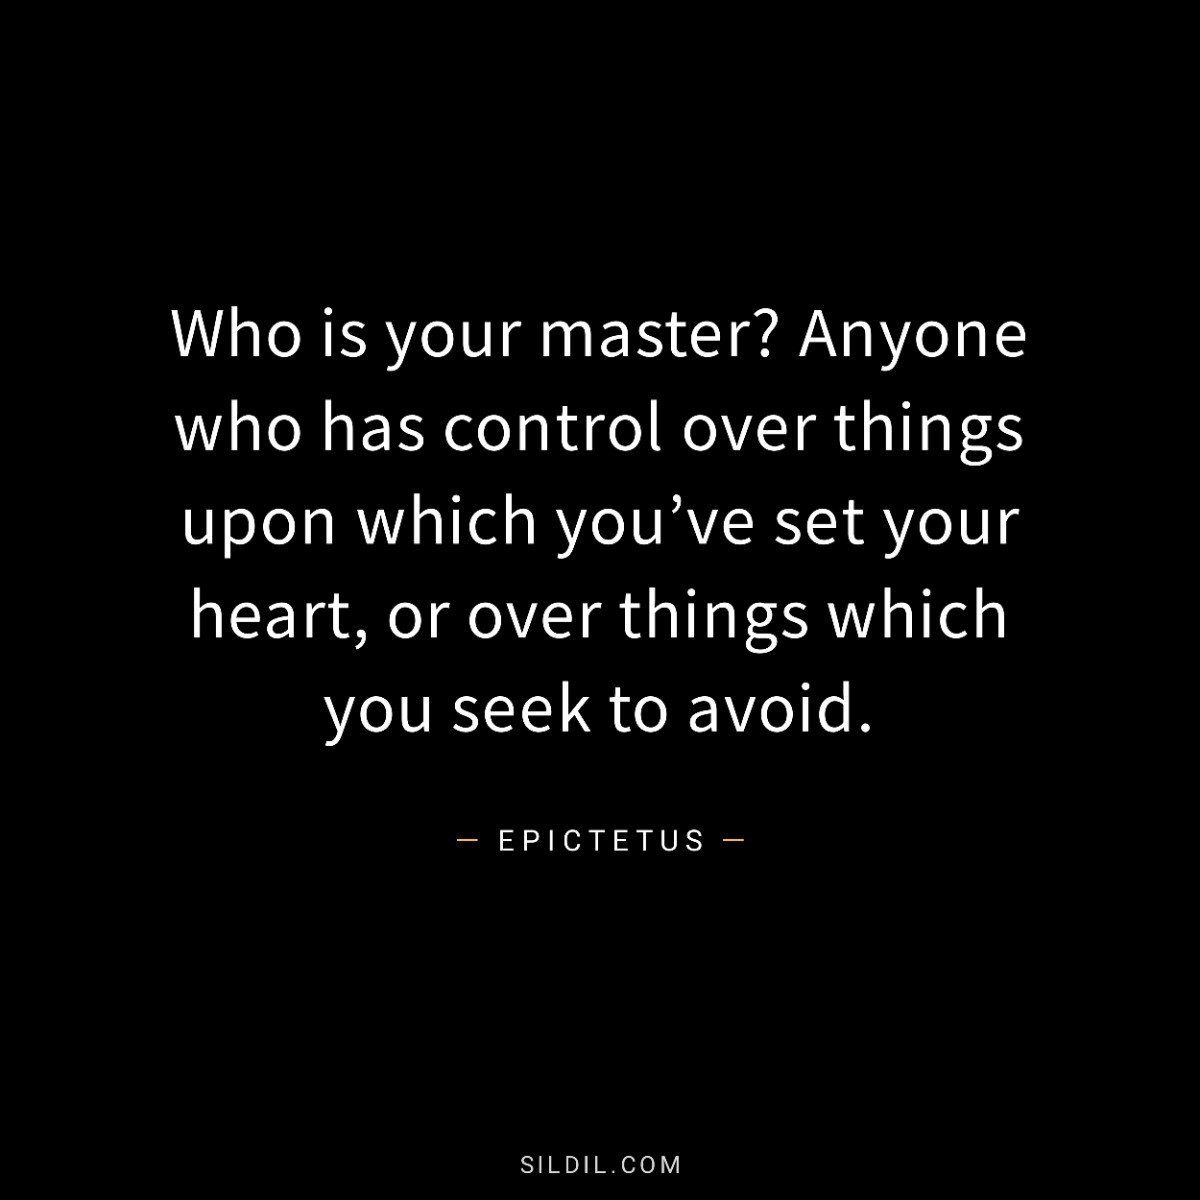 Who is your master? Anyone who has control over things upon which you’ve set your heart, or over things which you seek to avoid.